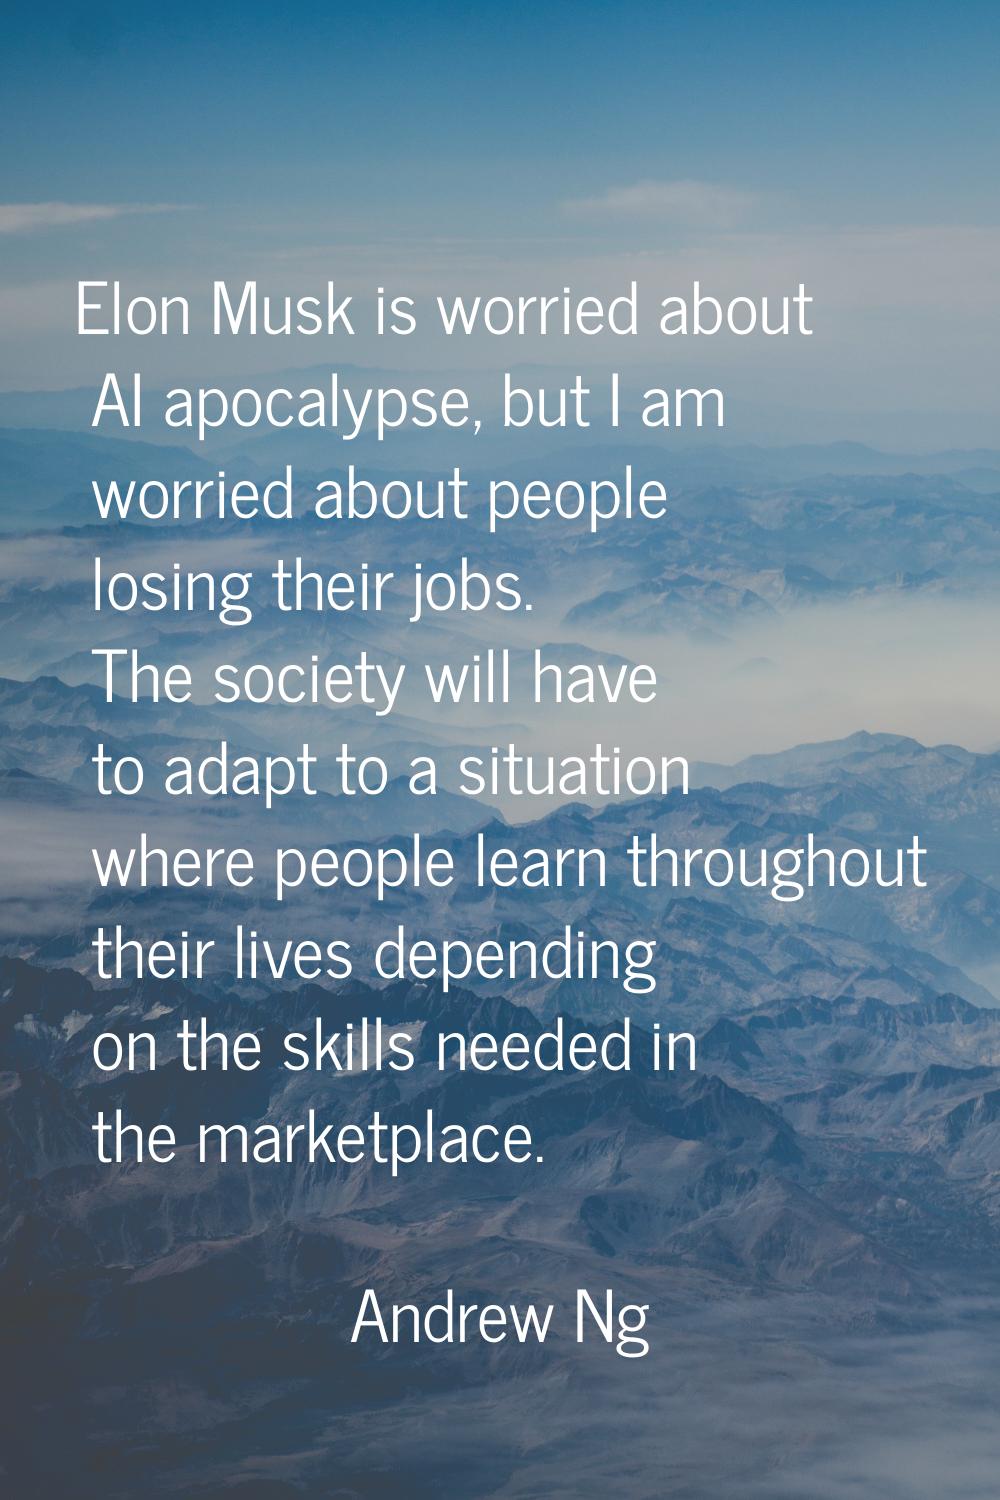 Elon Musk is worried about AI apocalypse, but I am worried about people losing their jobs. The soci